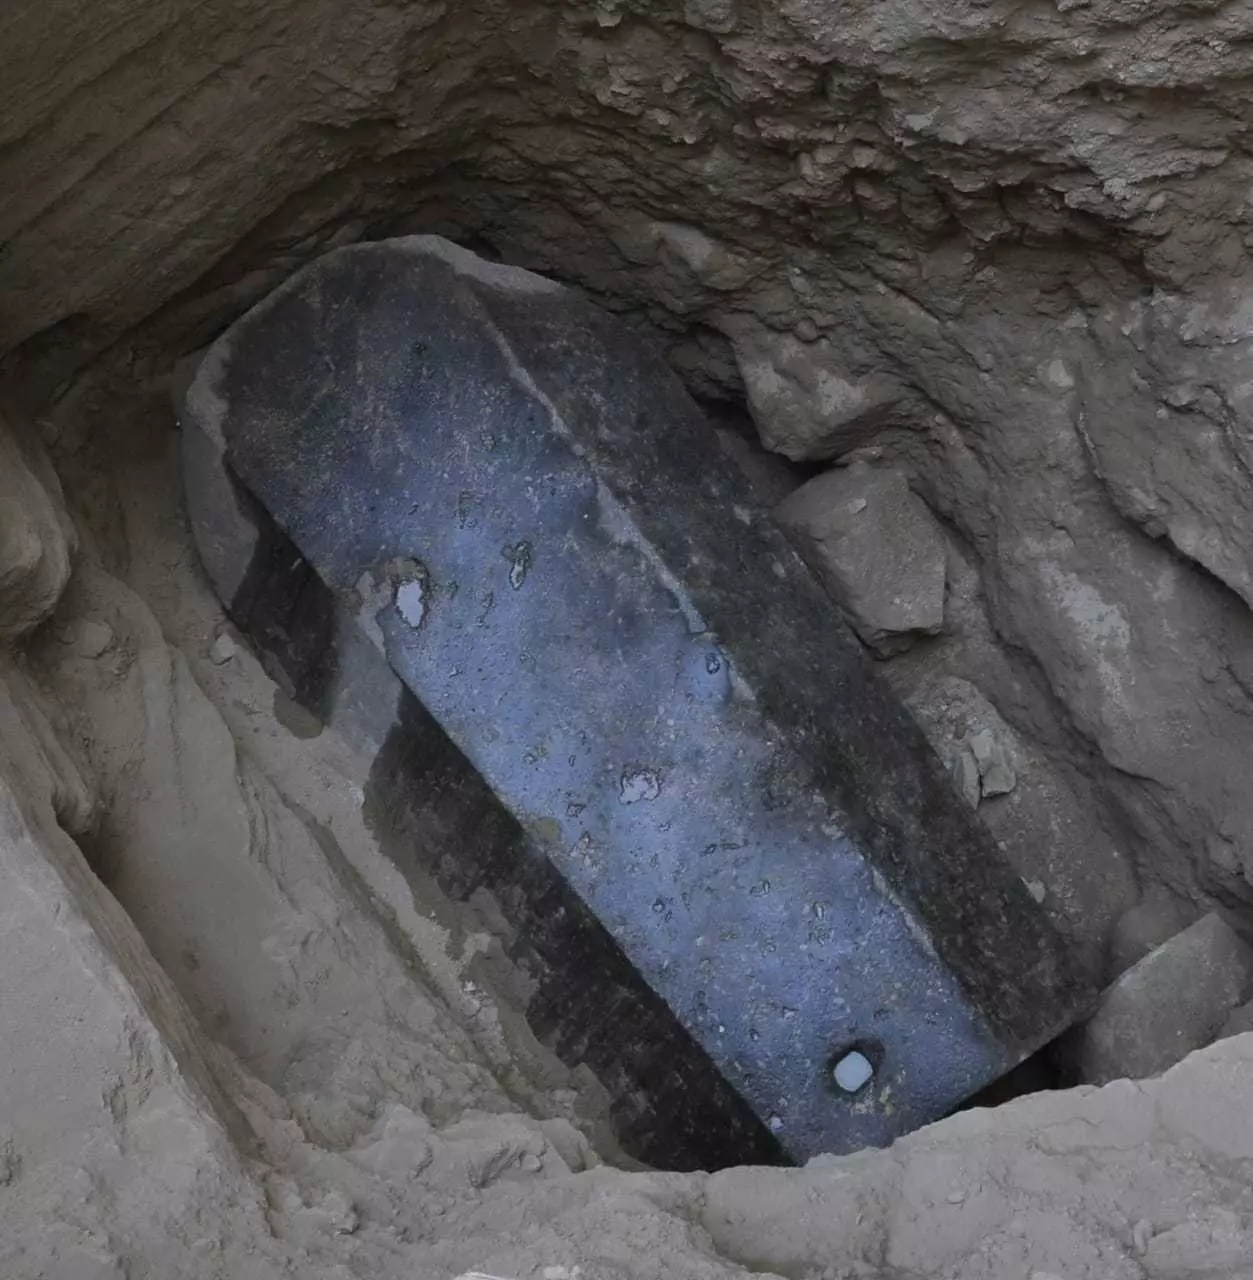 A huge, black granite sarcophagus was also discovered earlier this year in Alexandria, Egypt.